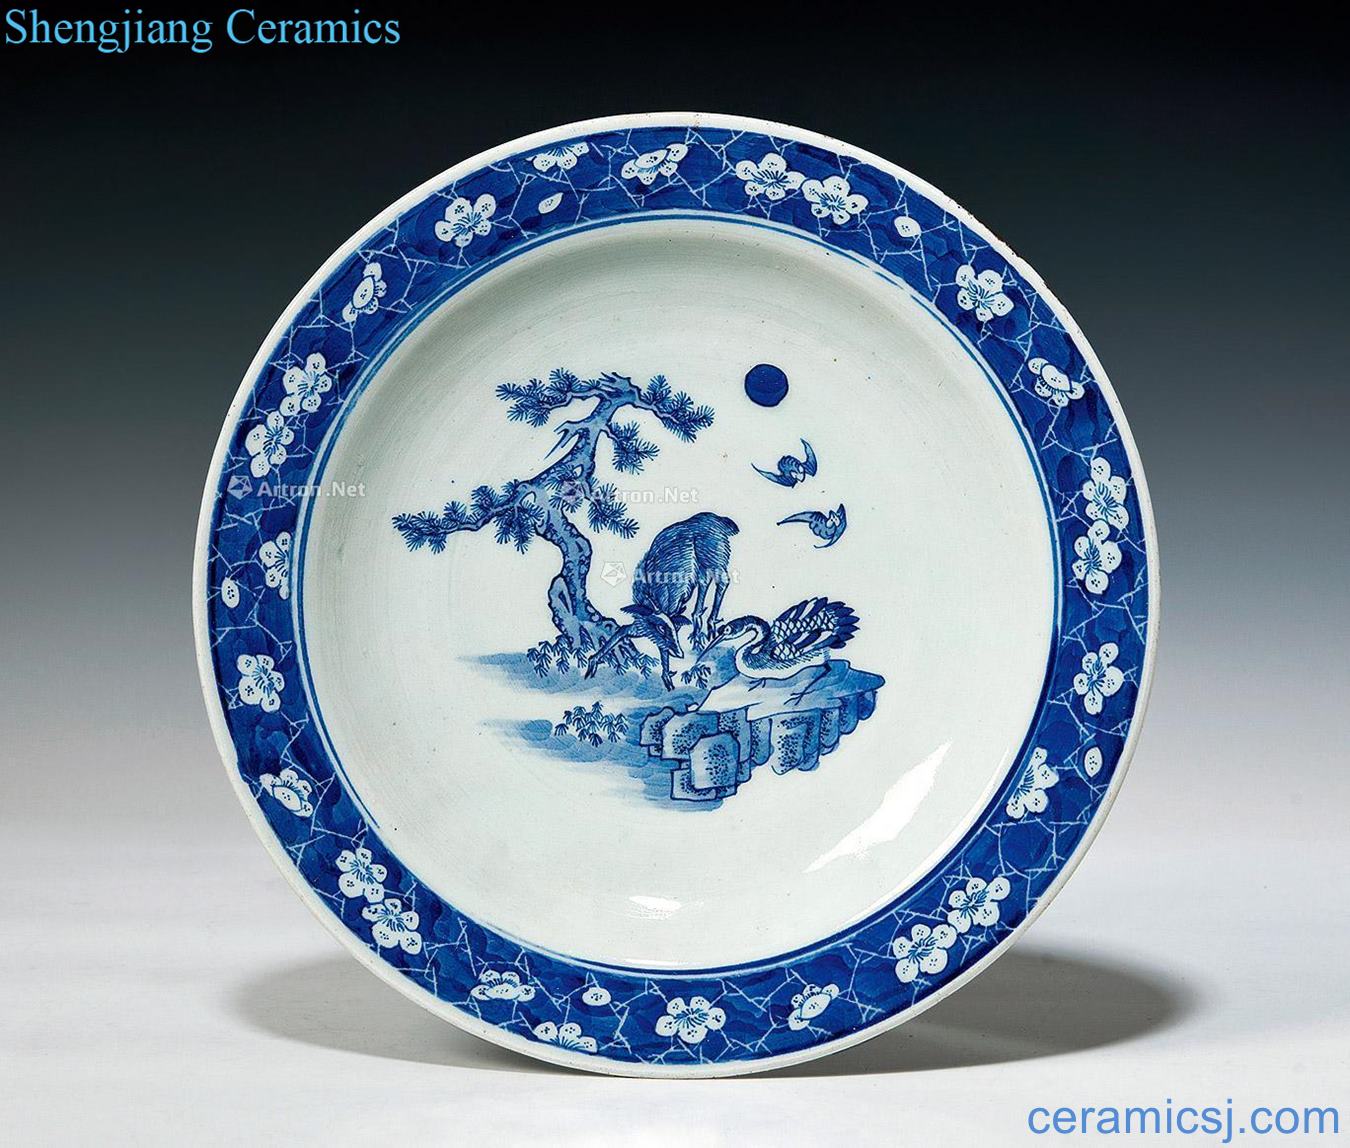 In the 19th century Blue and white fu lu shou wen the broader market